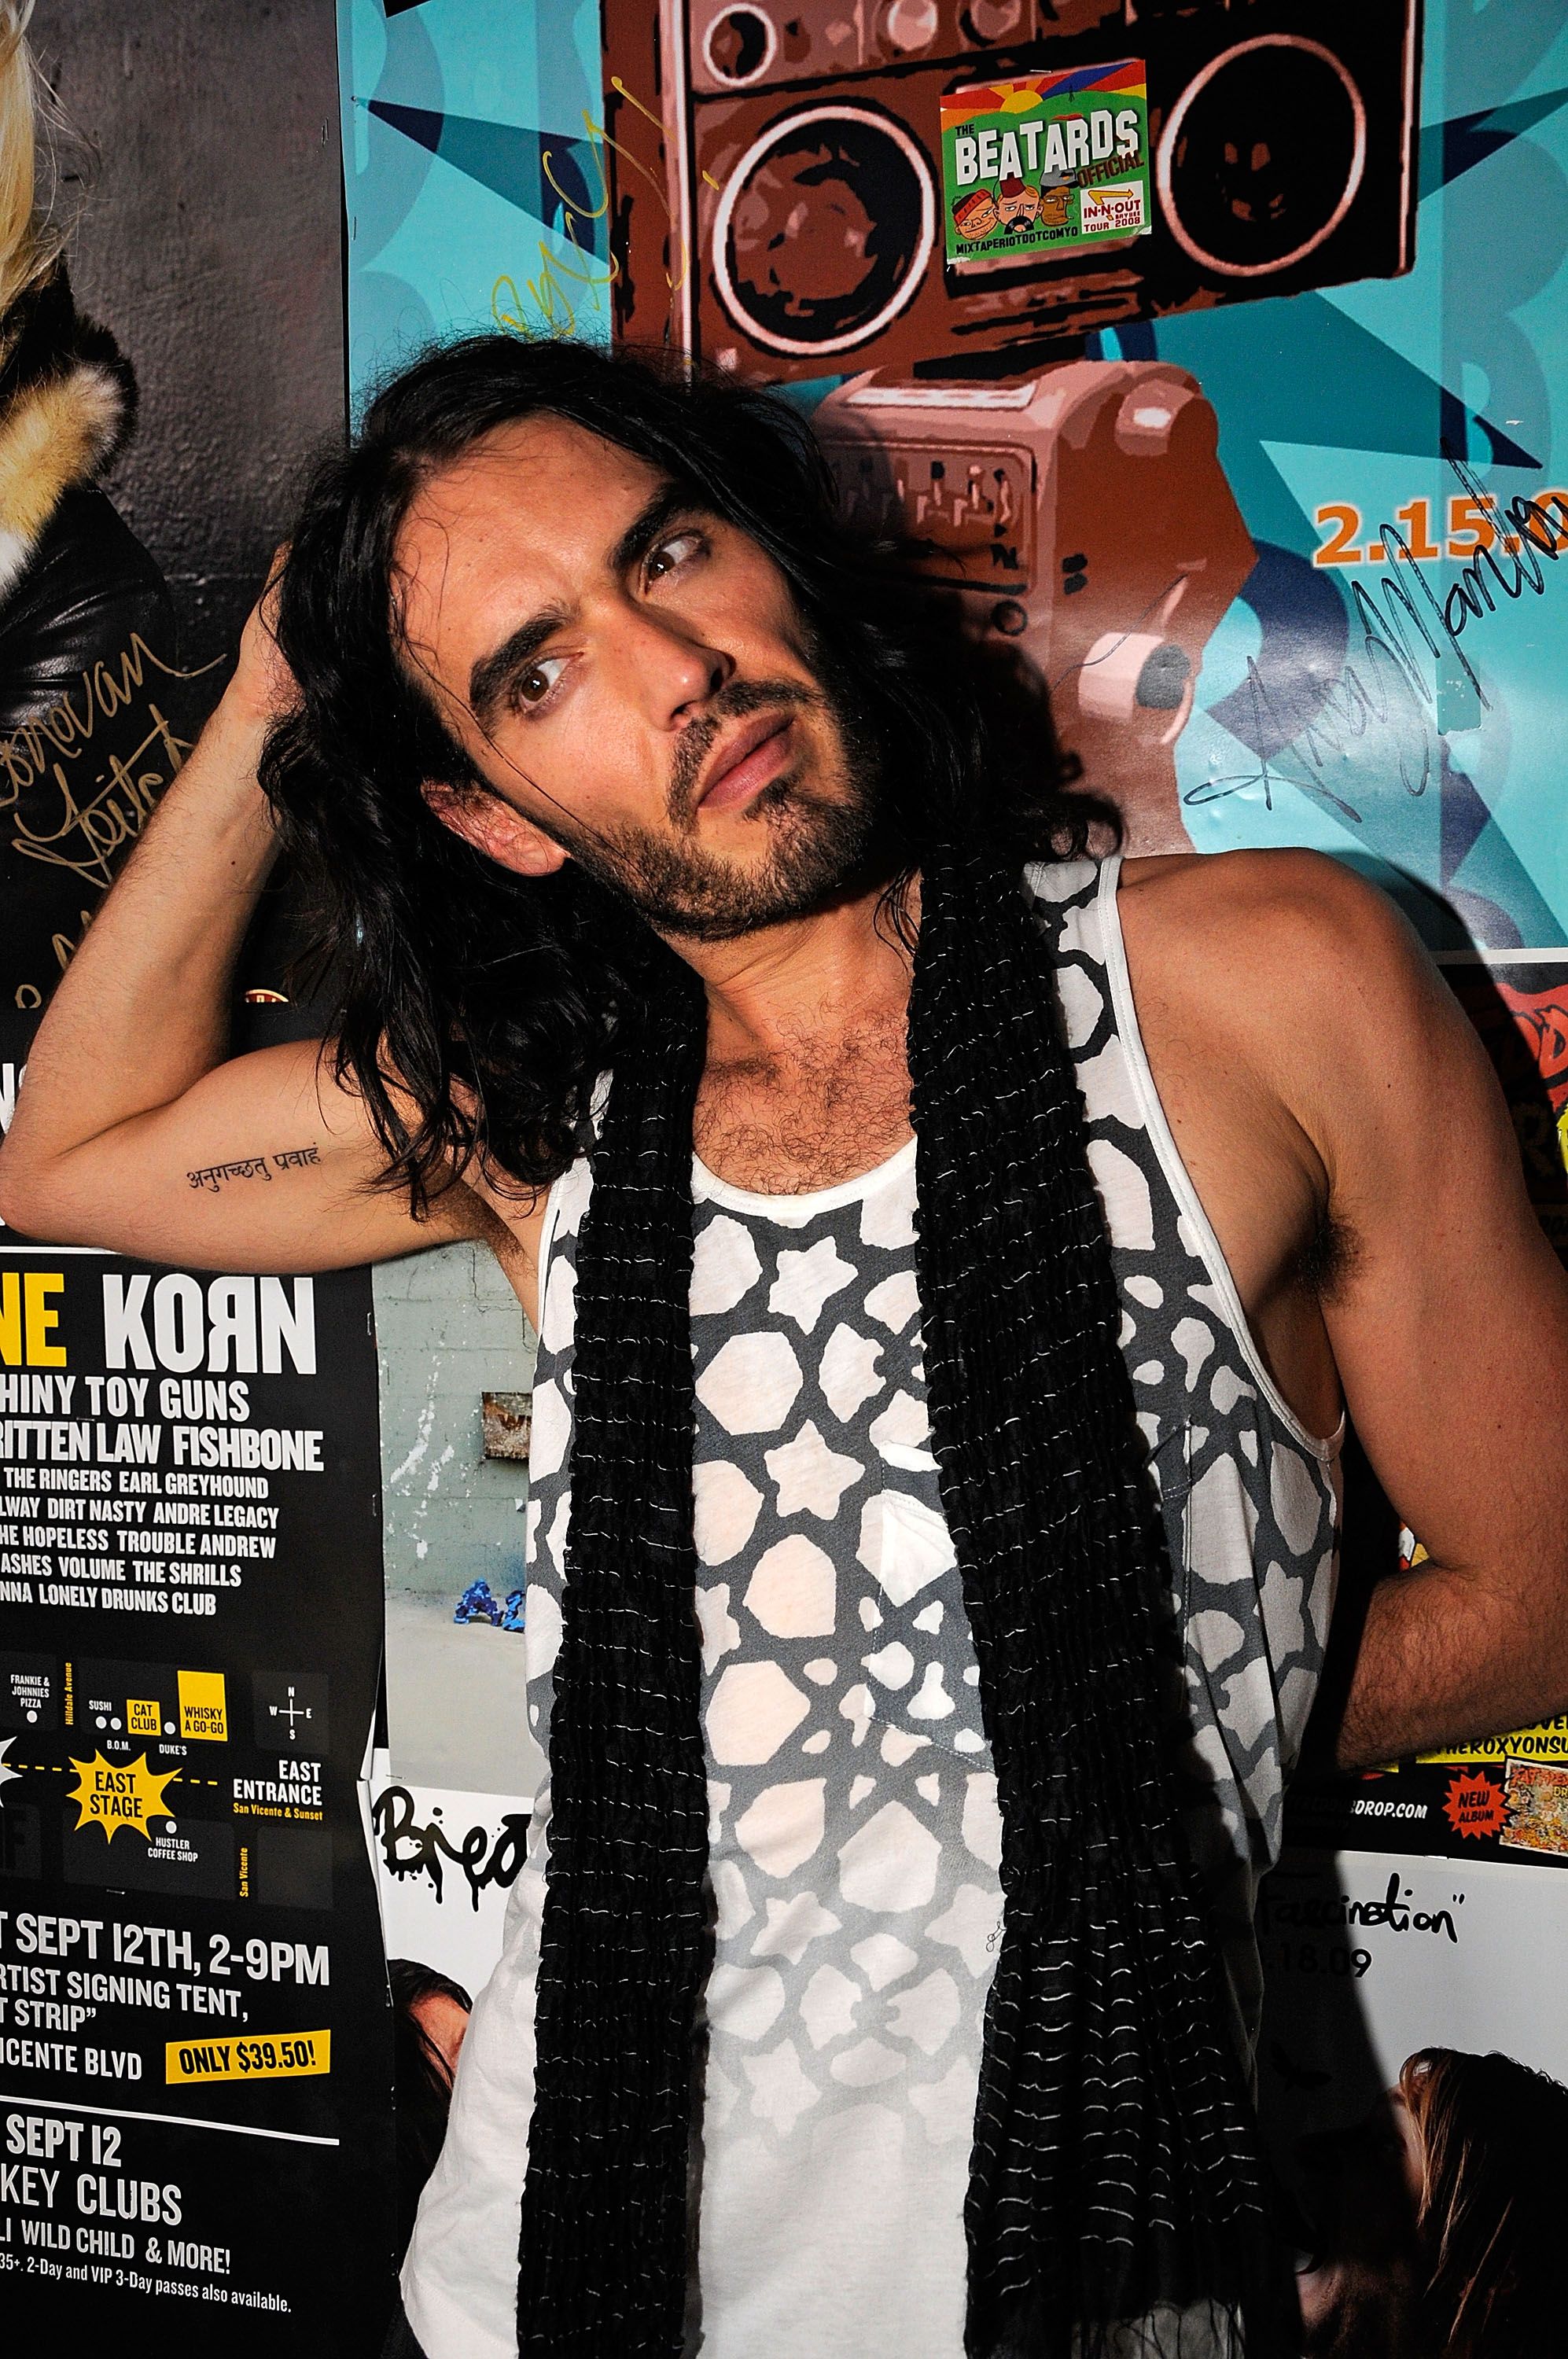 Russell Brand backstage following a concert to promote the film "Get Him To The Greek" in 2010 in West Hollywood | Source: Getty Images